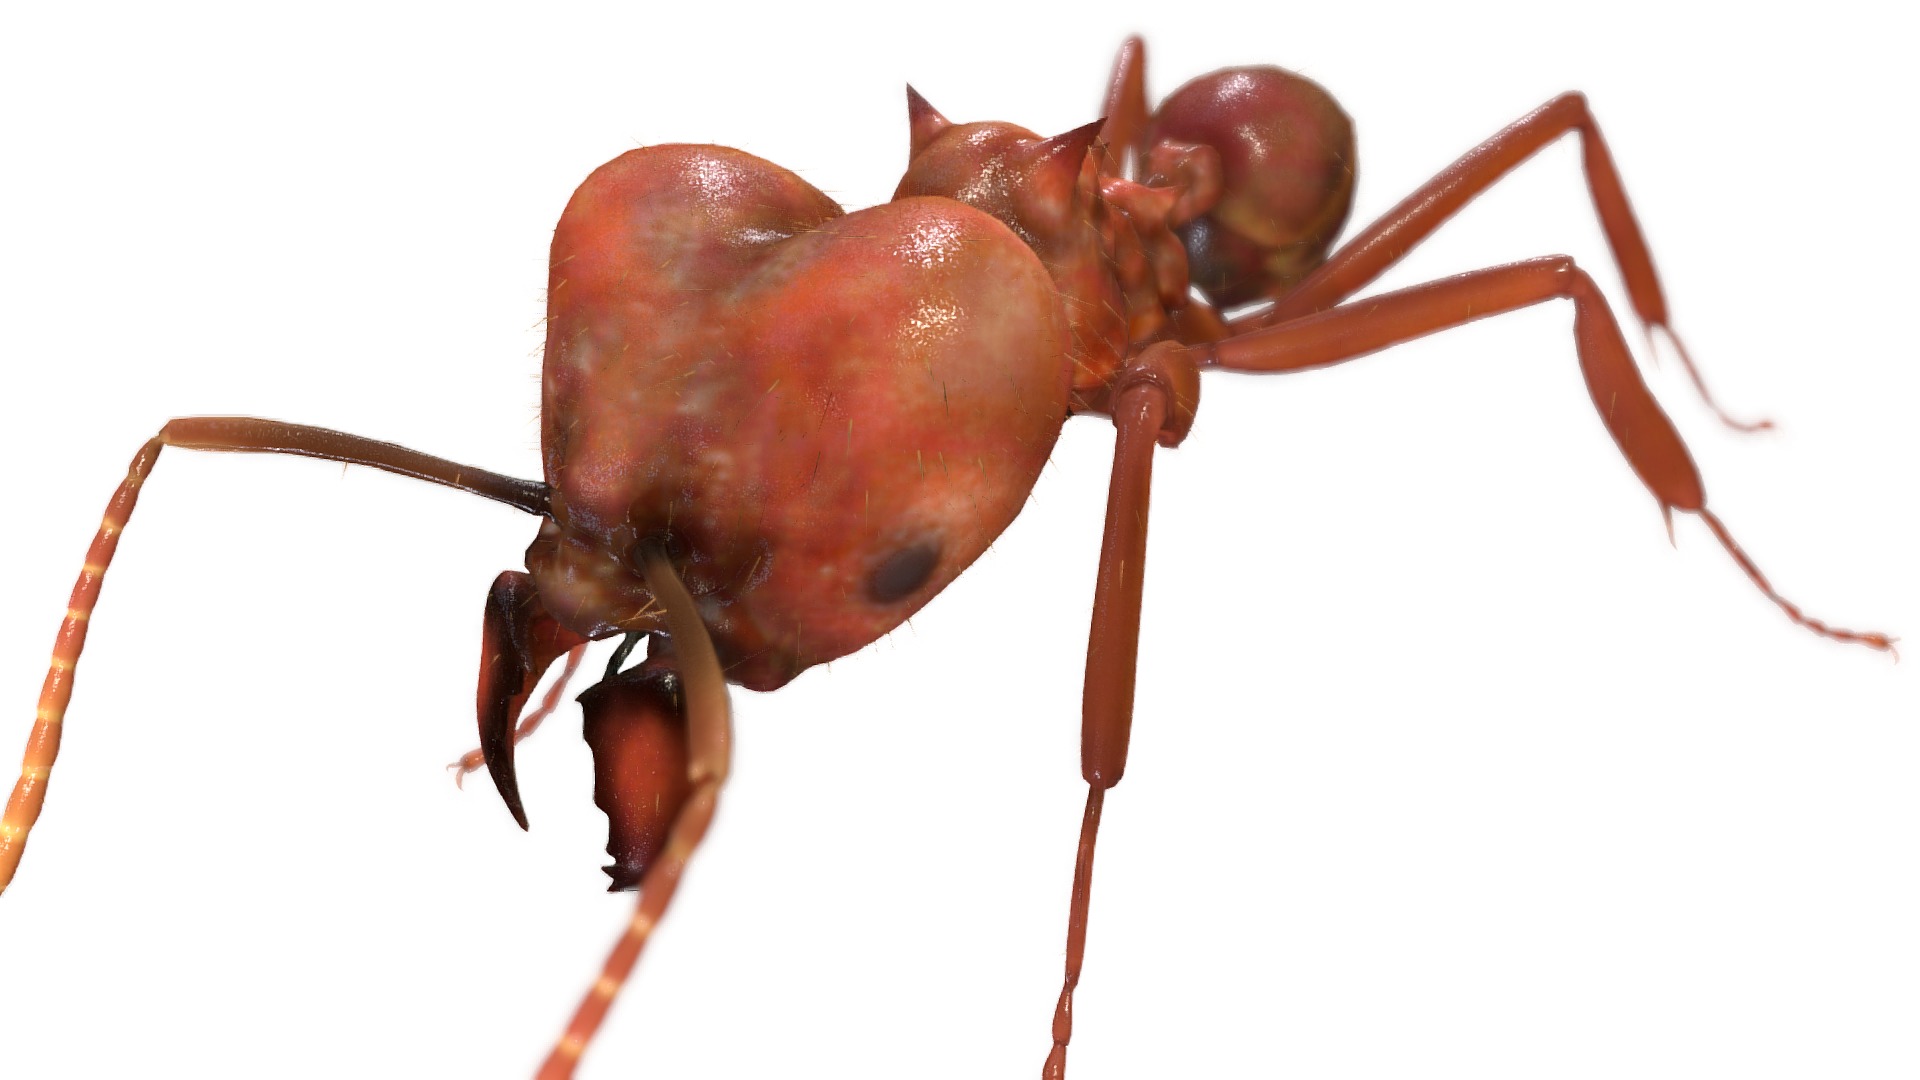 3D model Atta sexdens - This is a 3D model of the Atta sexdens. The 3D model is about a close up of a bug.